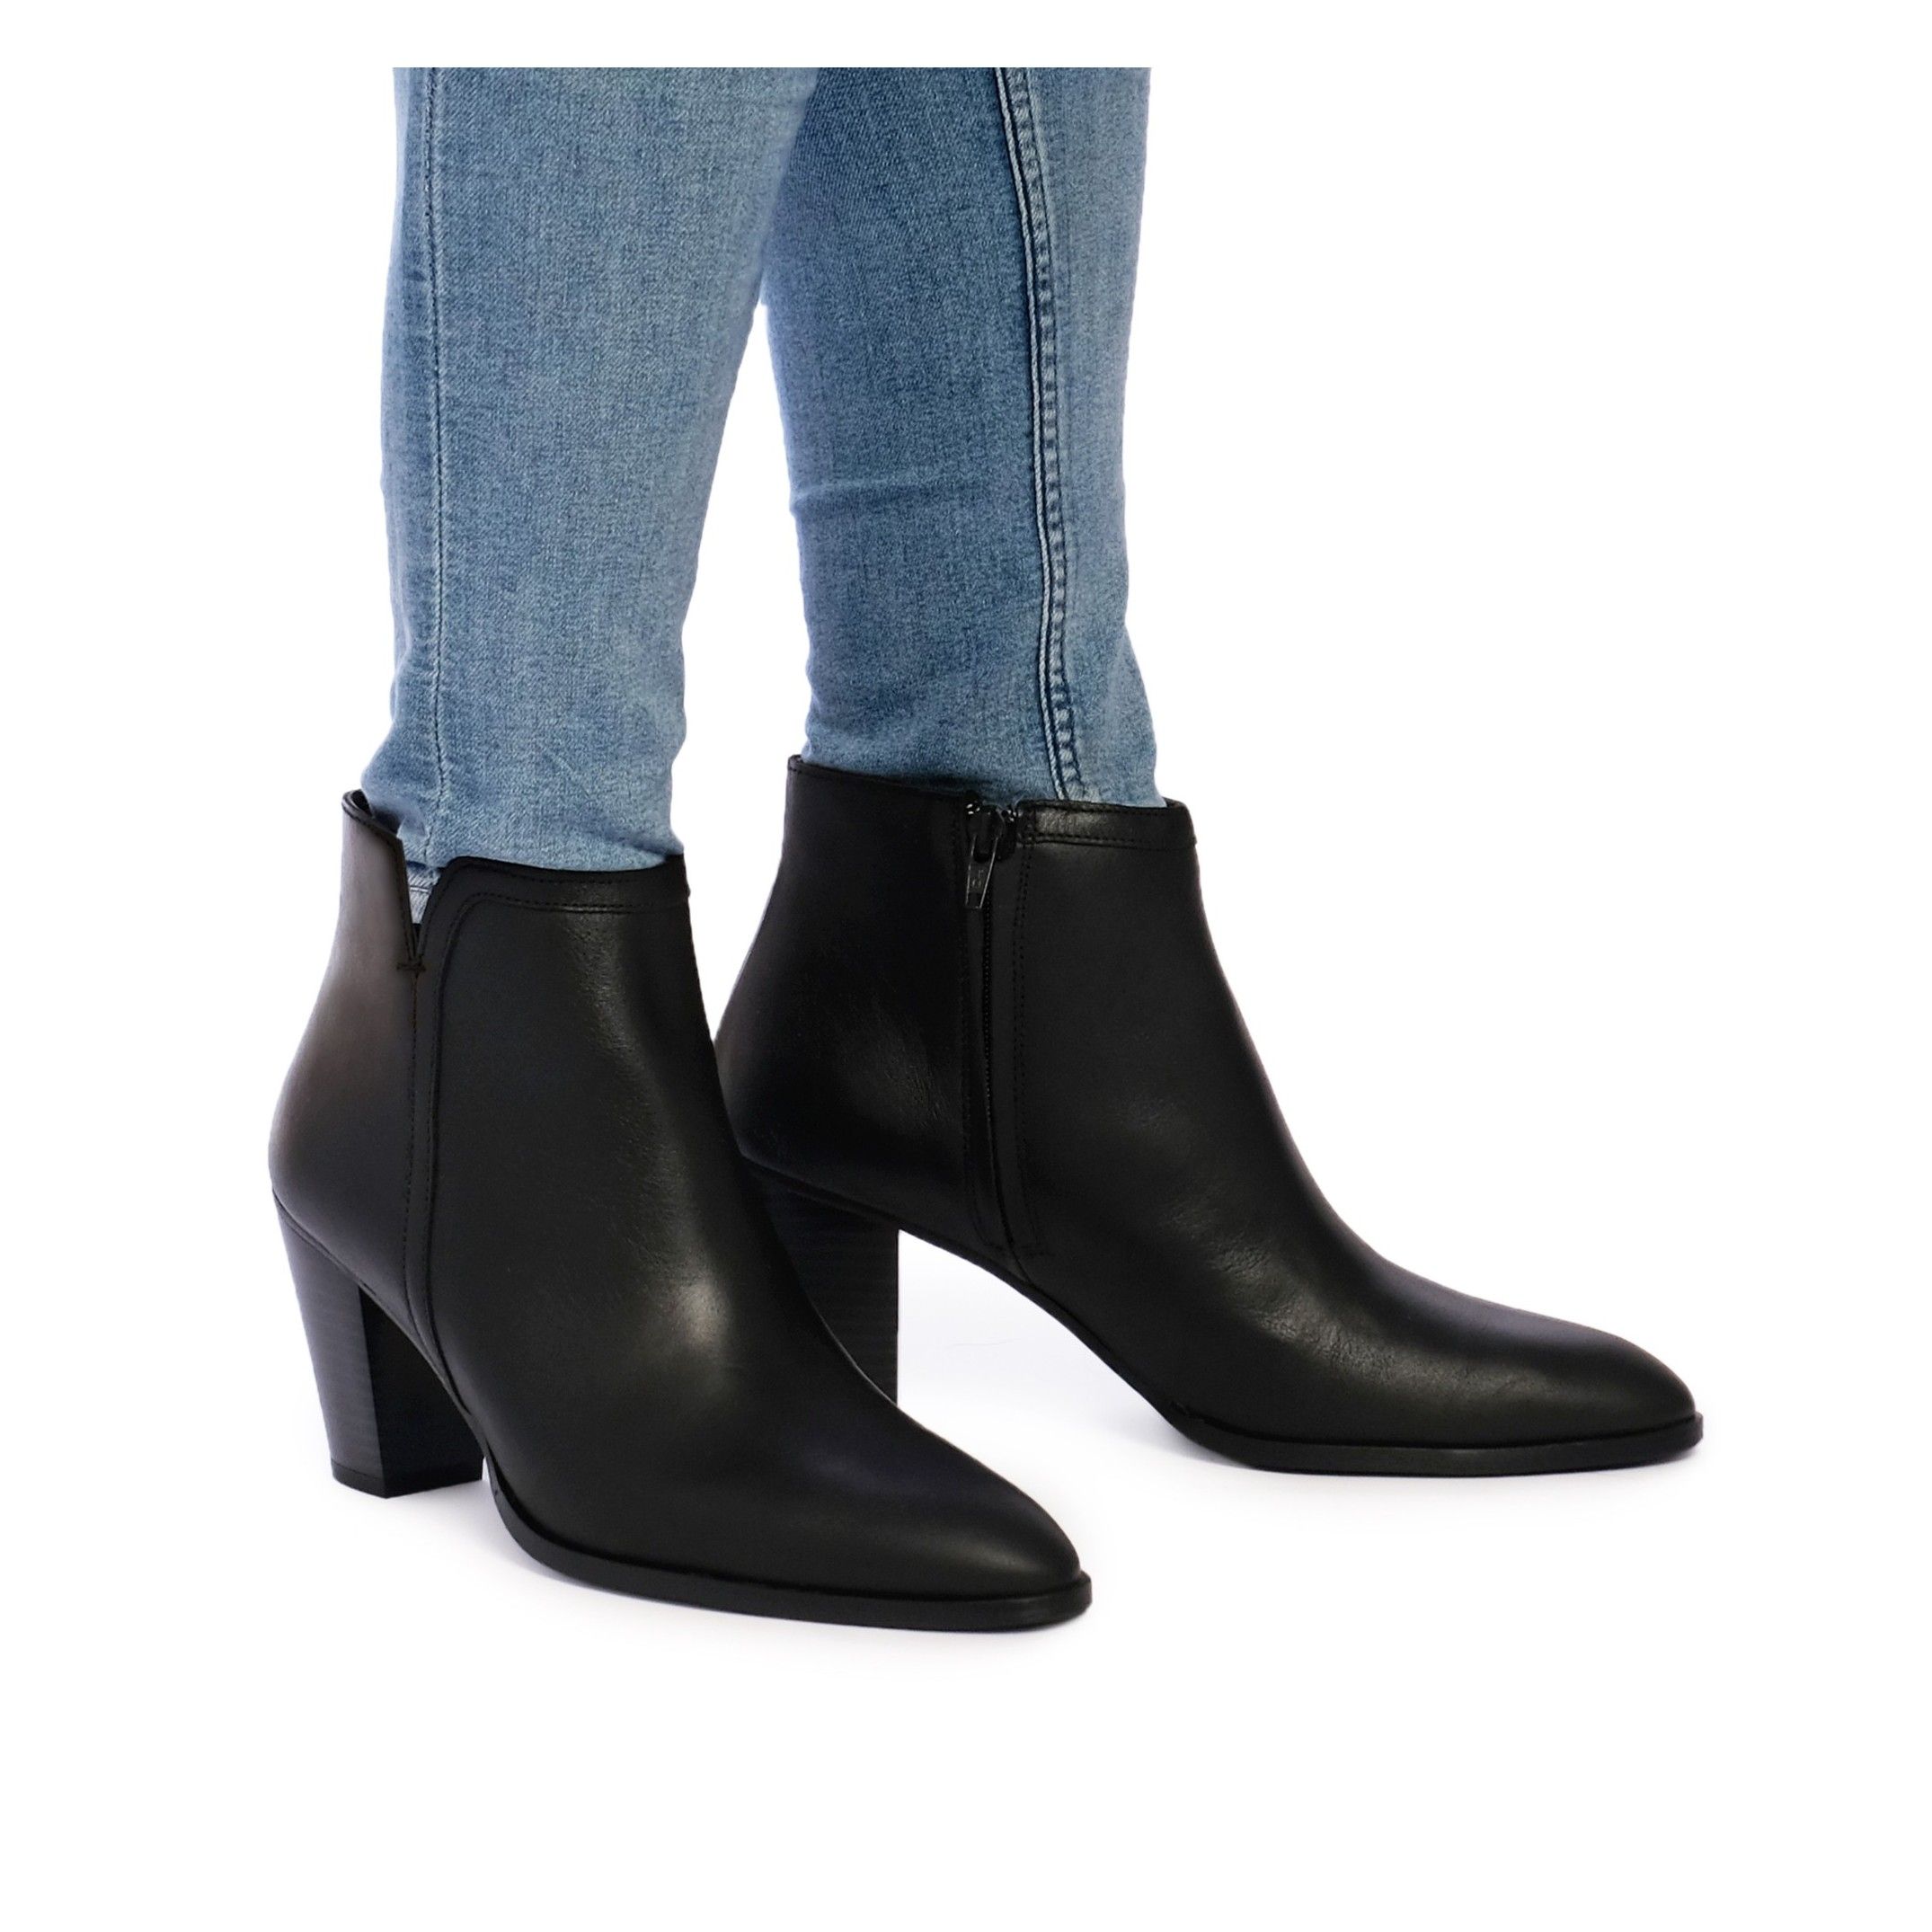 Leather boots for women cowboy style. Upper, inner and insole made of leather. Heel: 4,5 cm. Height cane: 19 cm. Made in Spain.